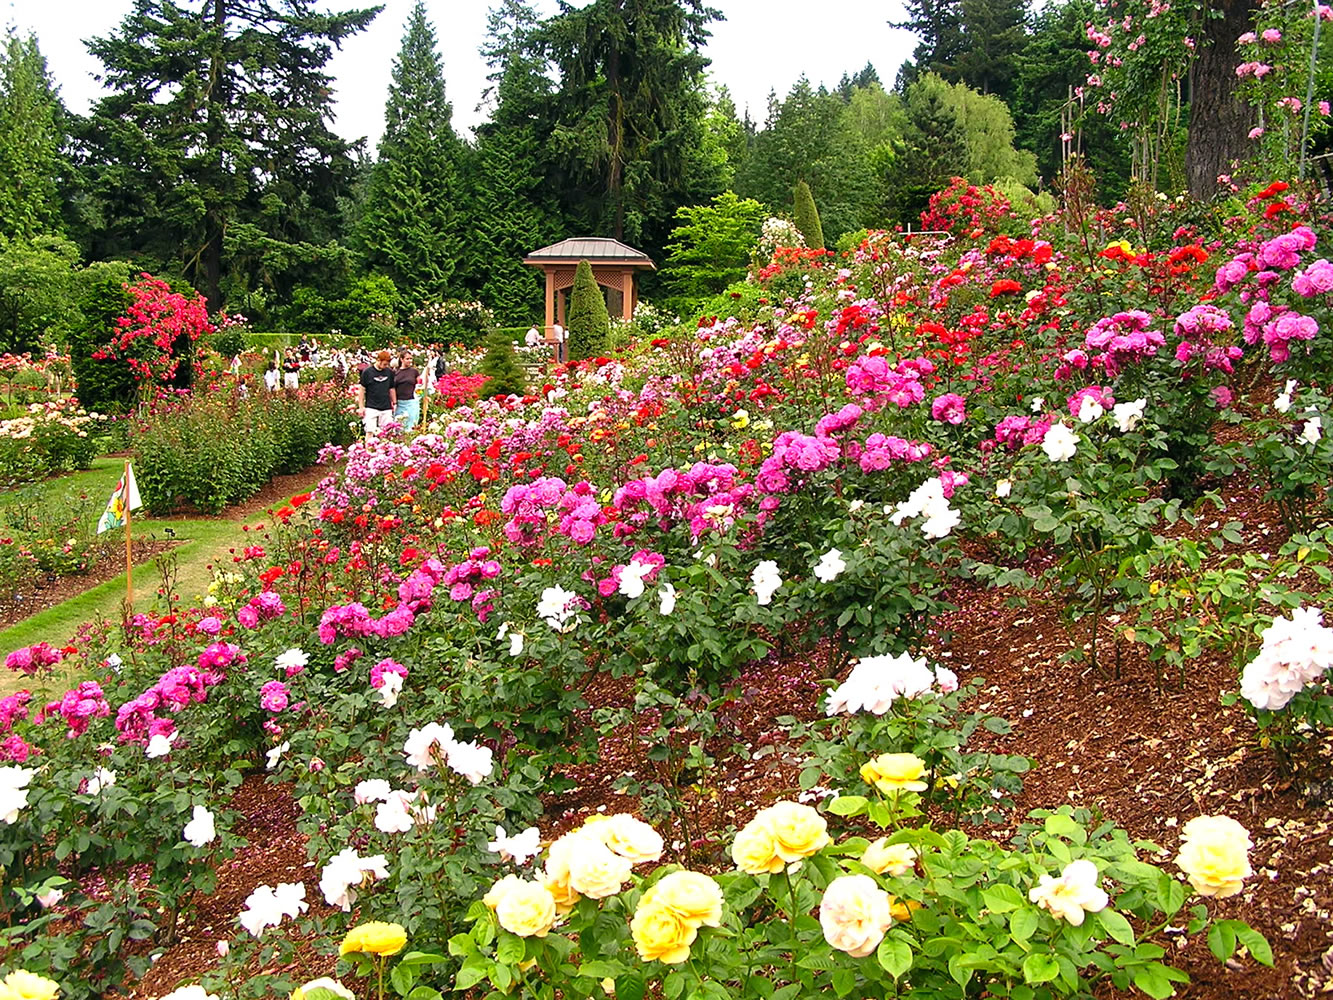 Portland Parks &amp; Recreation
The International Rose Test Garden in Washington Park in Portland was founded during World War I as a way to preserve plants that European hybridists feared might be wiped out in the bombings. This summer marks 100 years since the start of World War I in Europe in 1914.